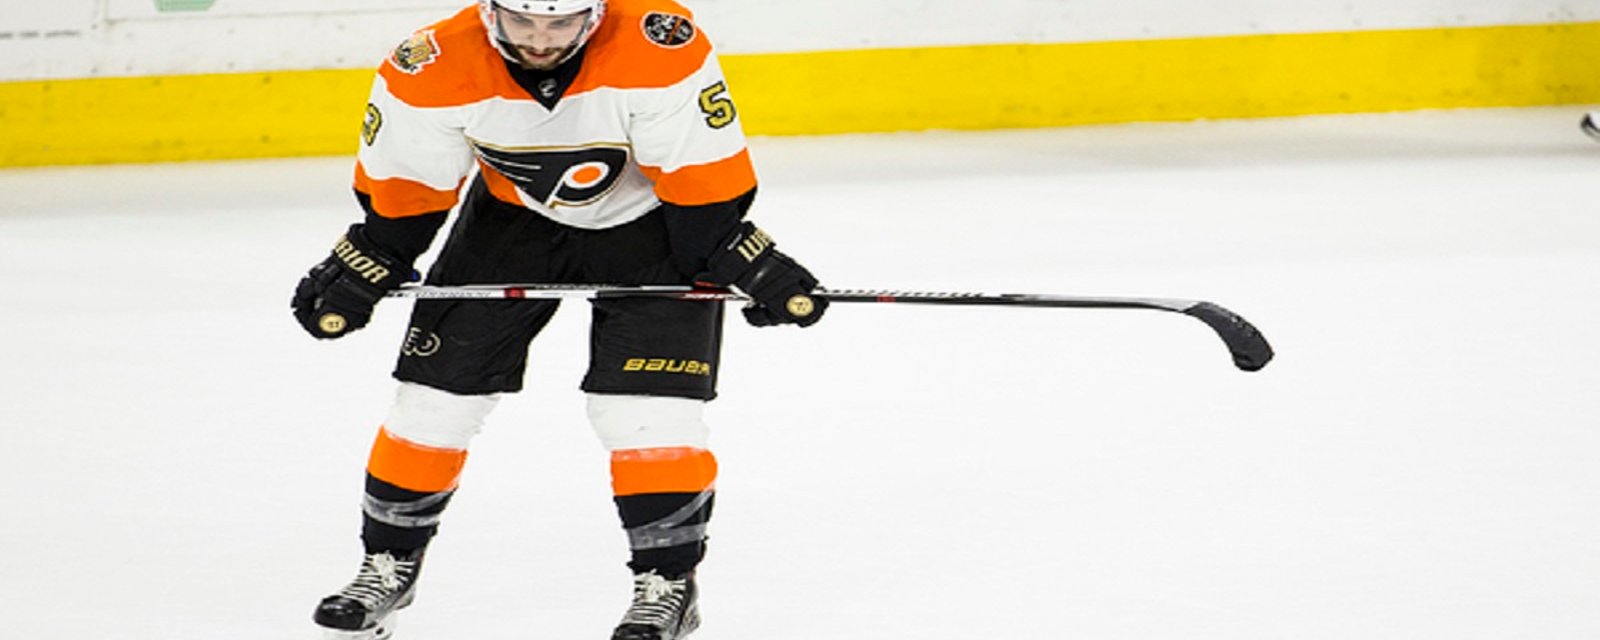 Possible trade coming between Flyers and Canadiens?